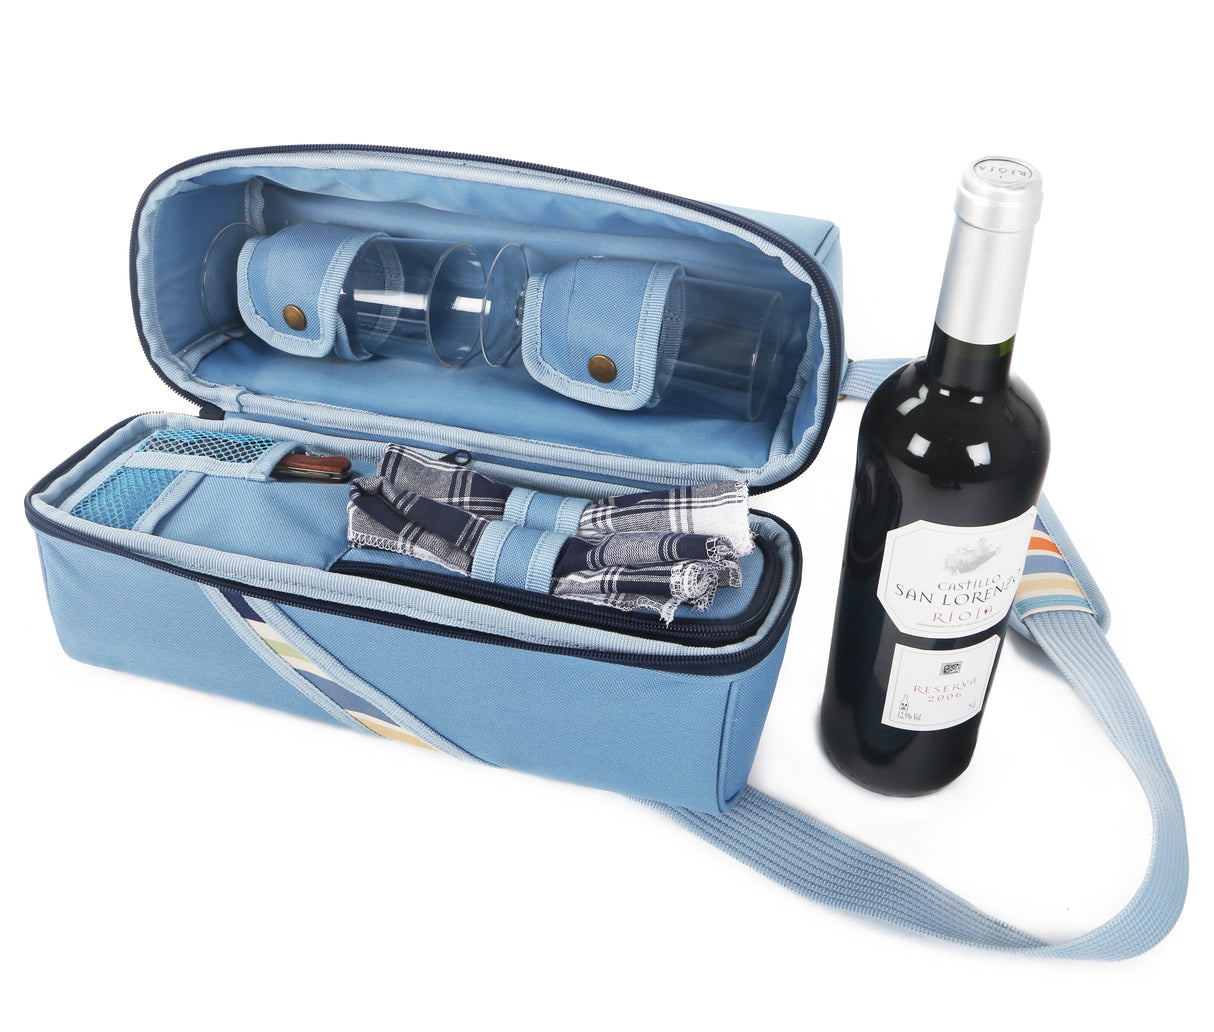 Greenfield Collection Deluxe Wine Cooler Bag for Two People - The Greenfield Collection